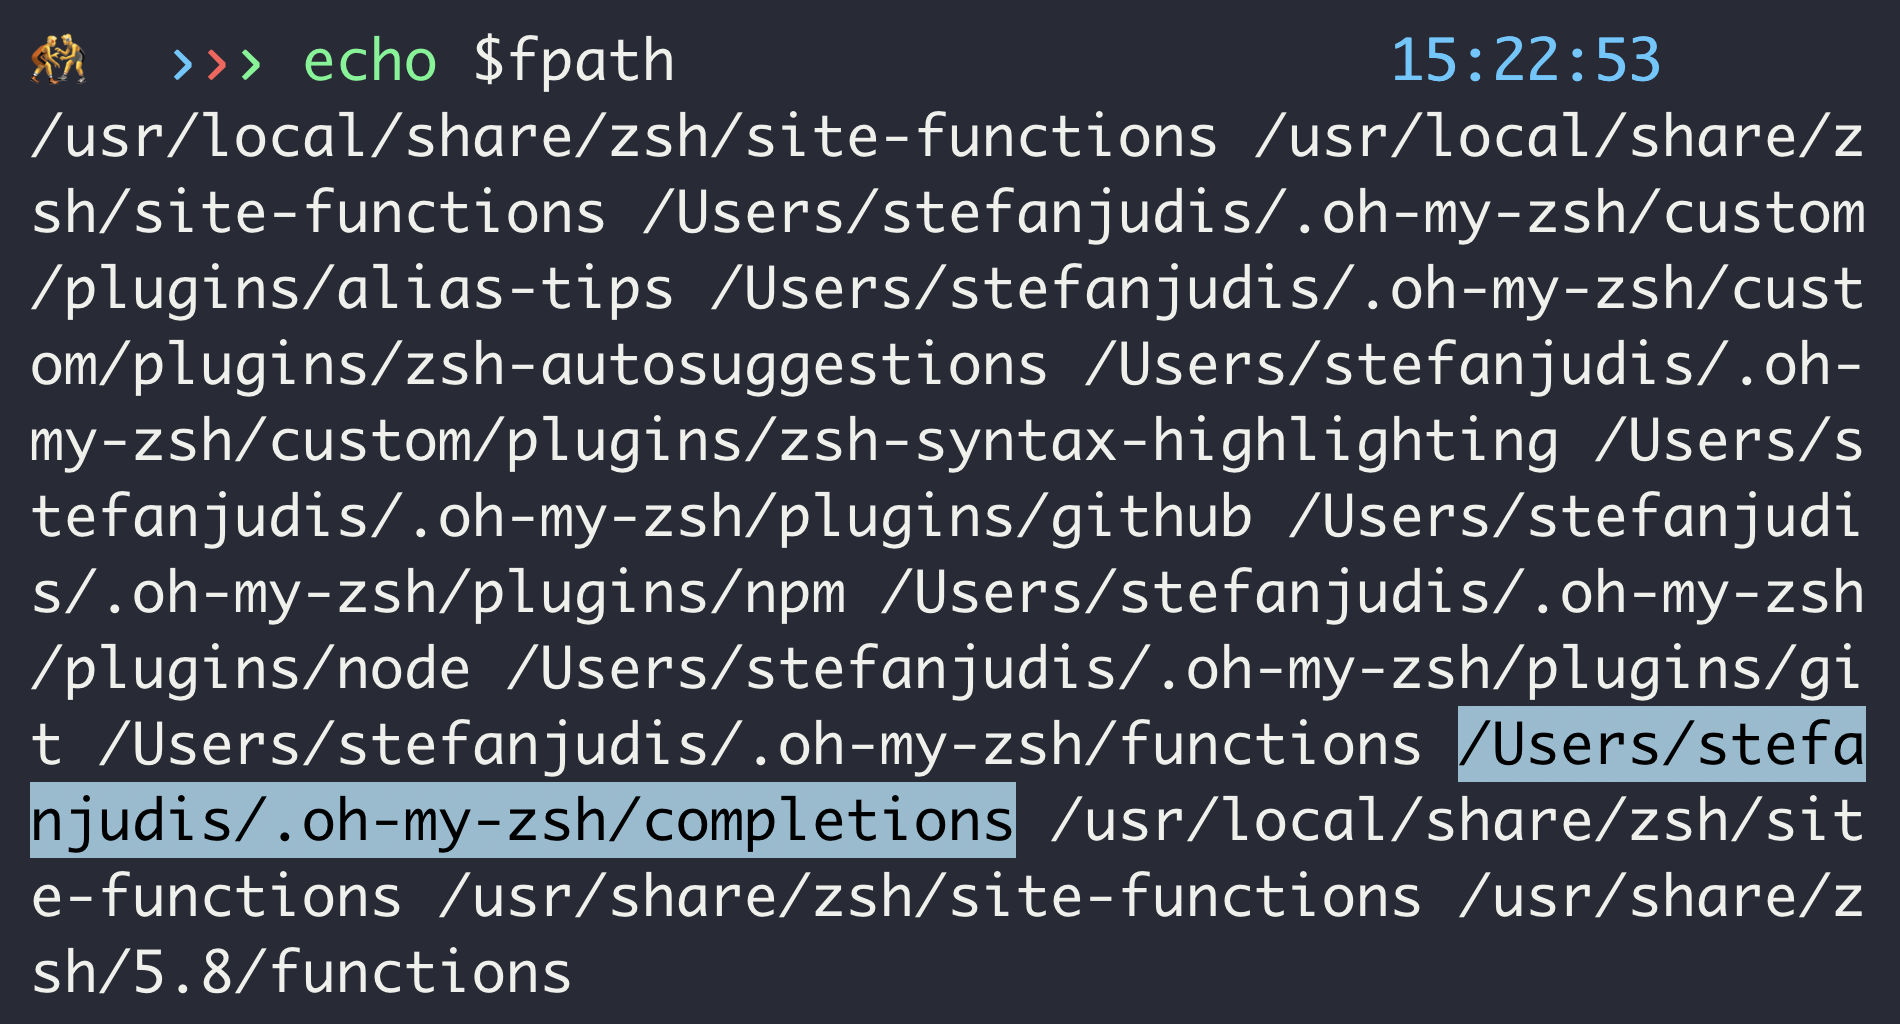 echo $fpath with highlighted path /Users/stefanjudis/.oh-my-zsh/completions